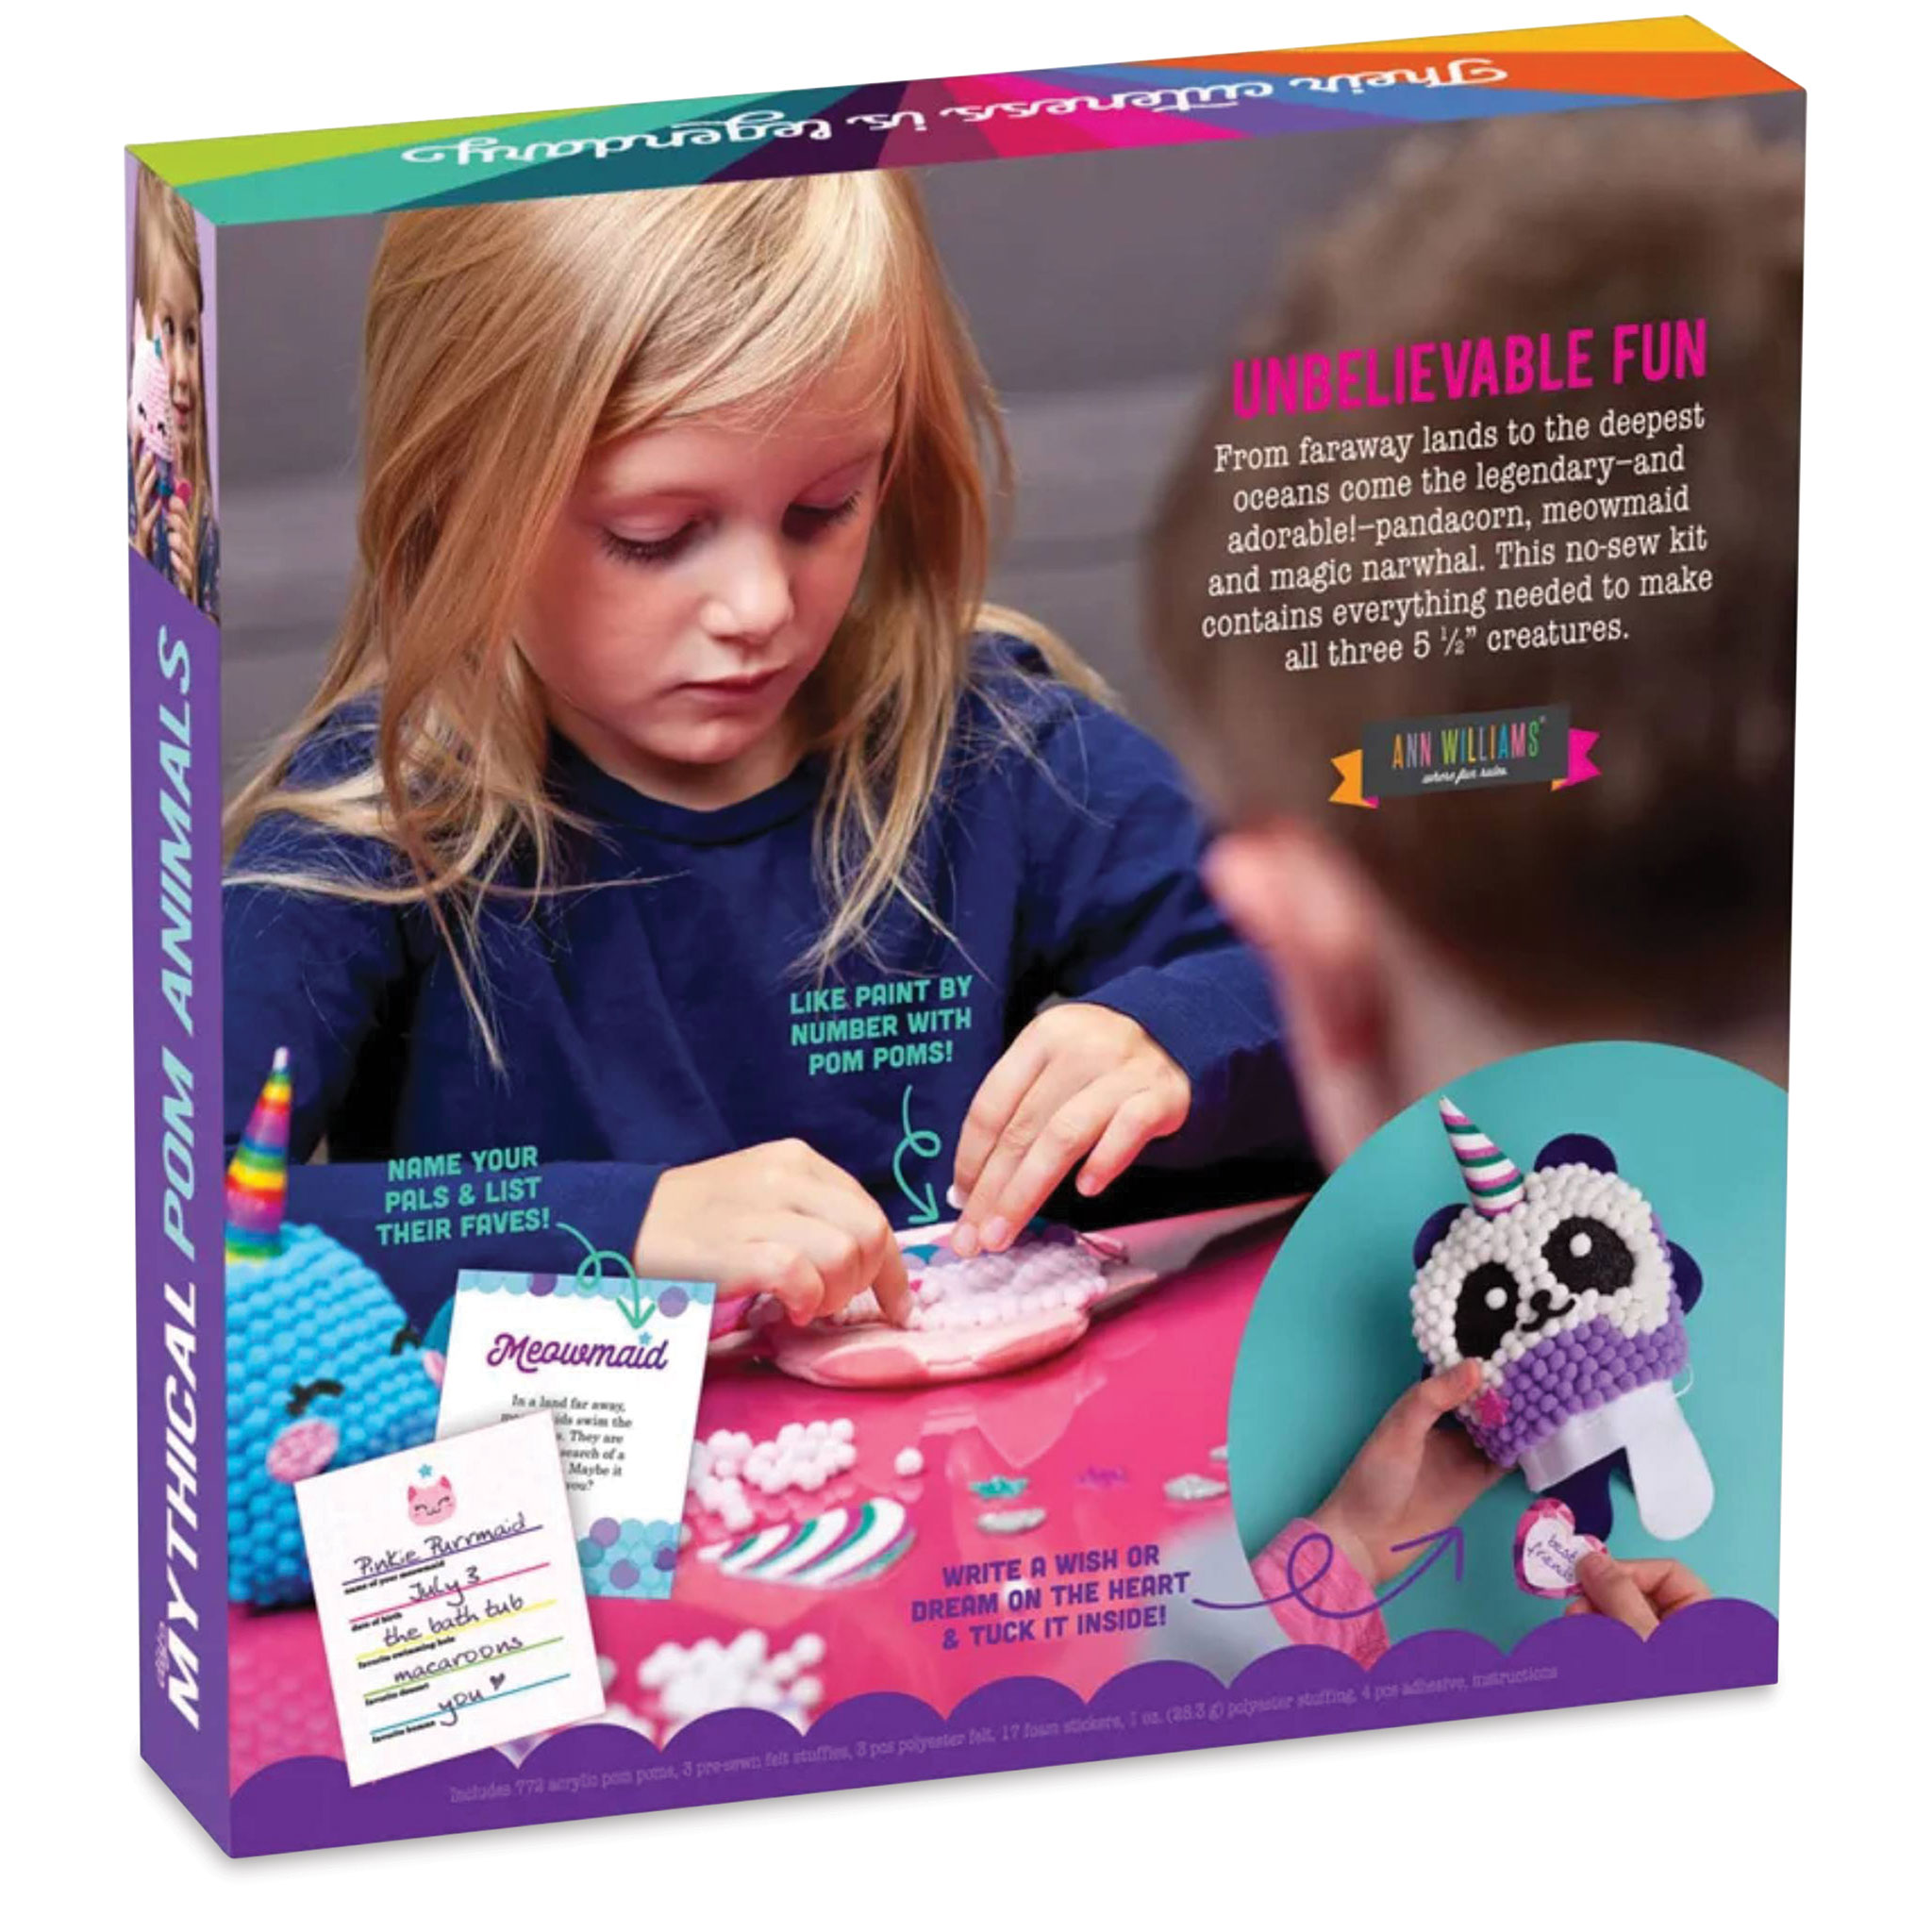 Craft Tastic Learn to Sew Kit